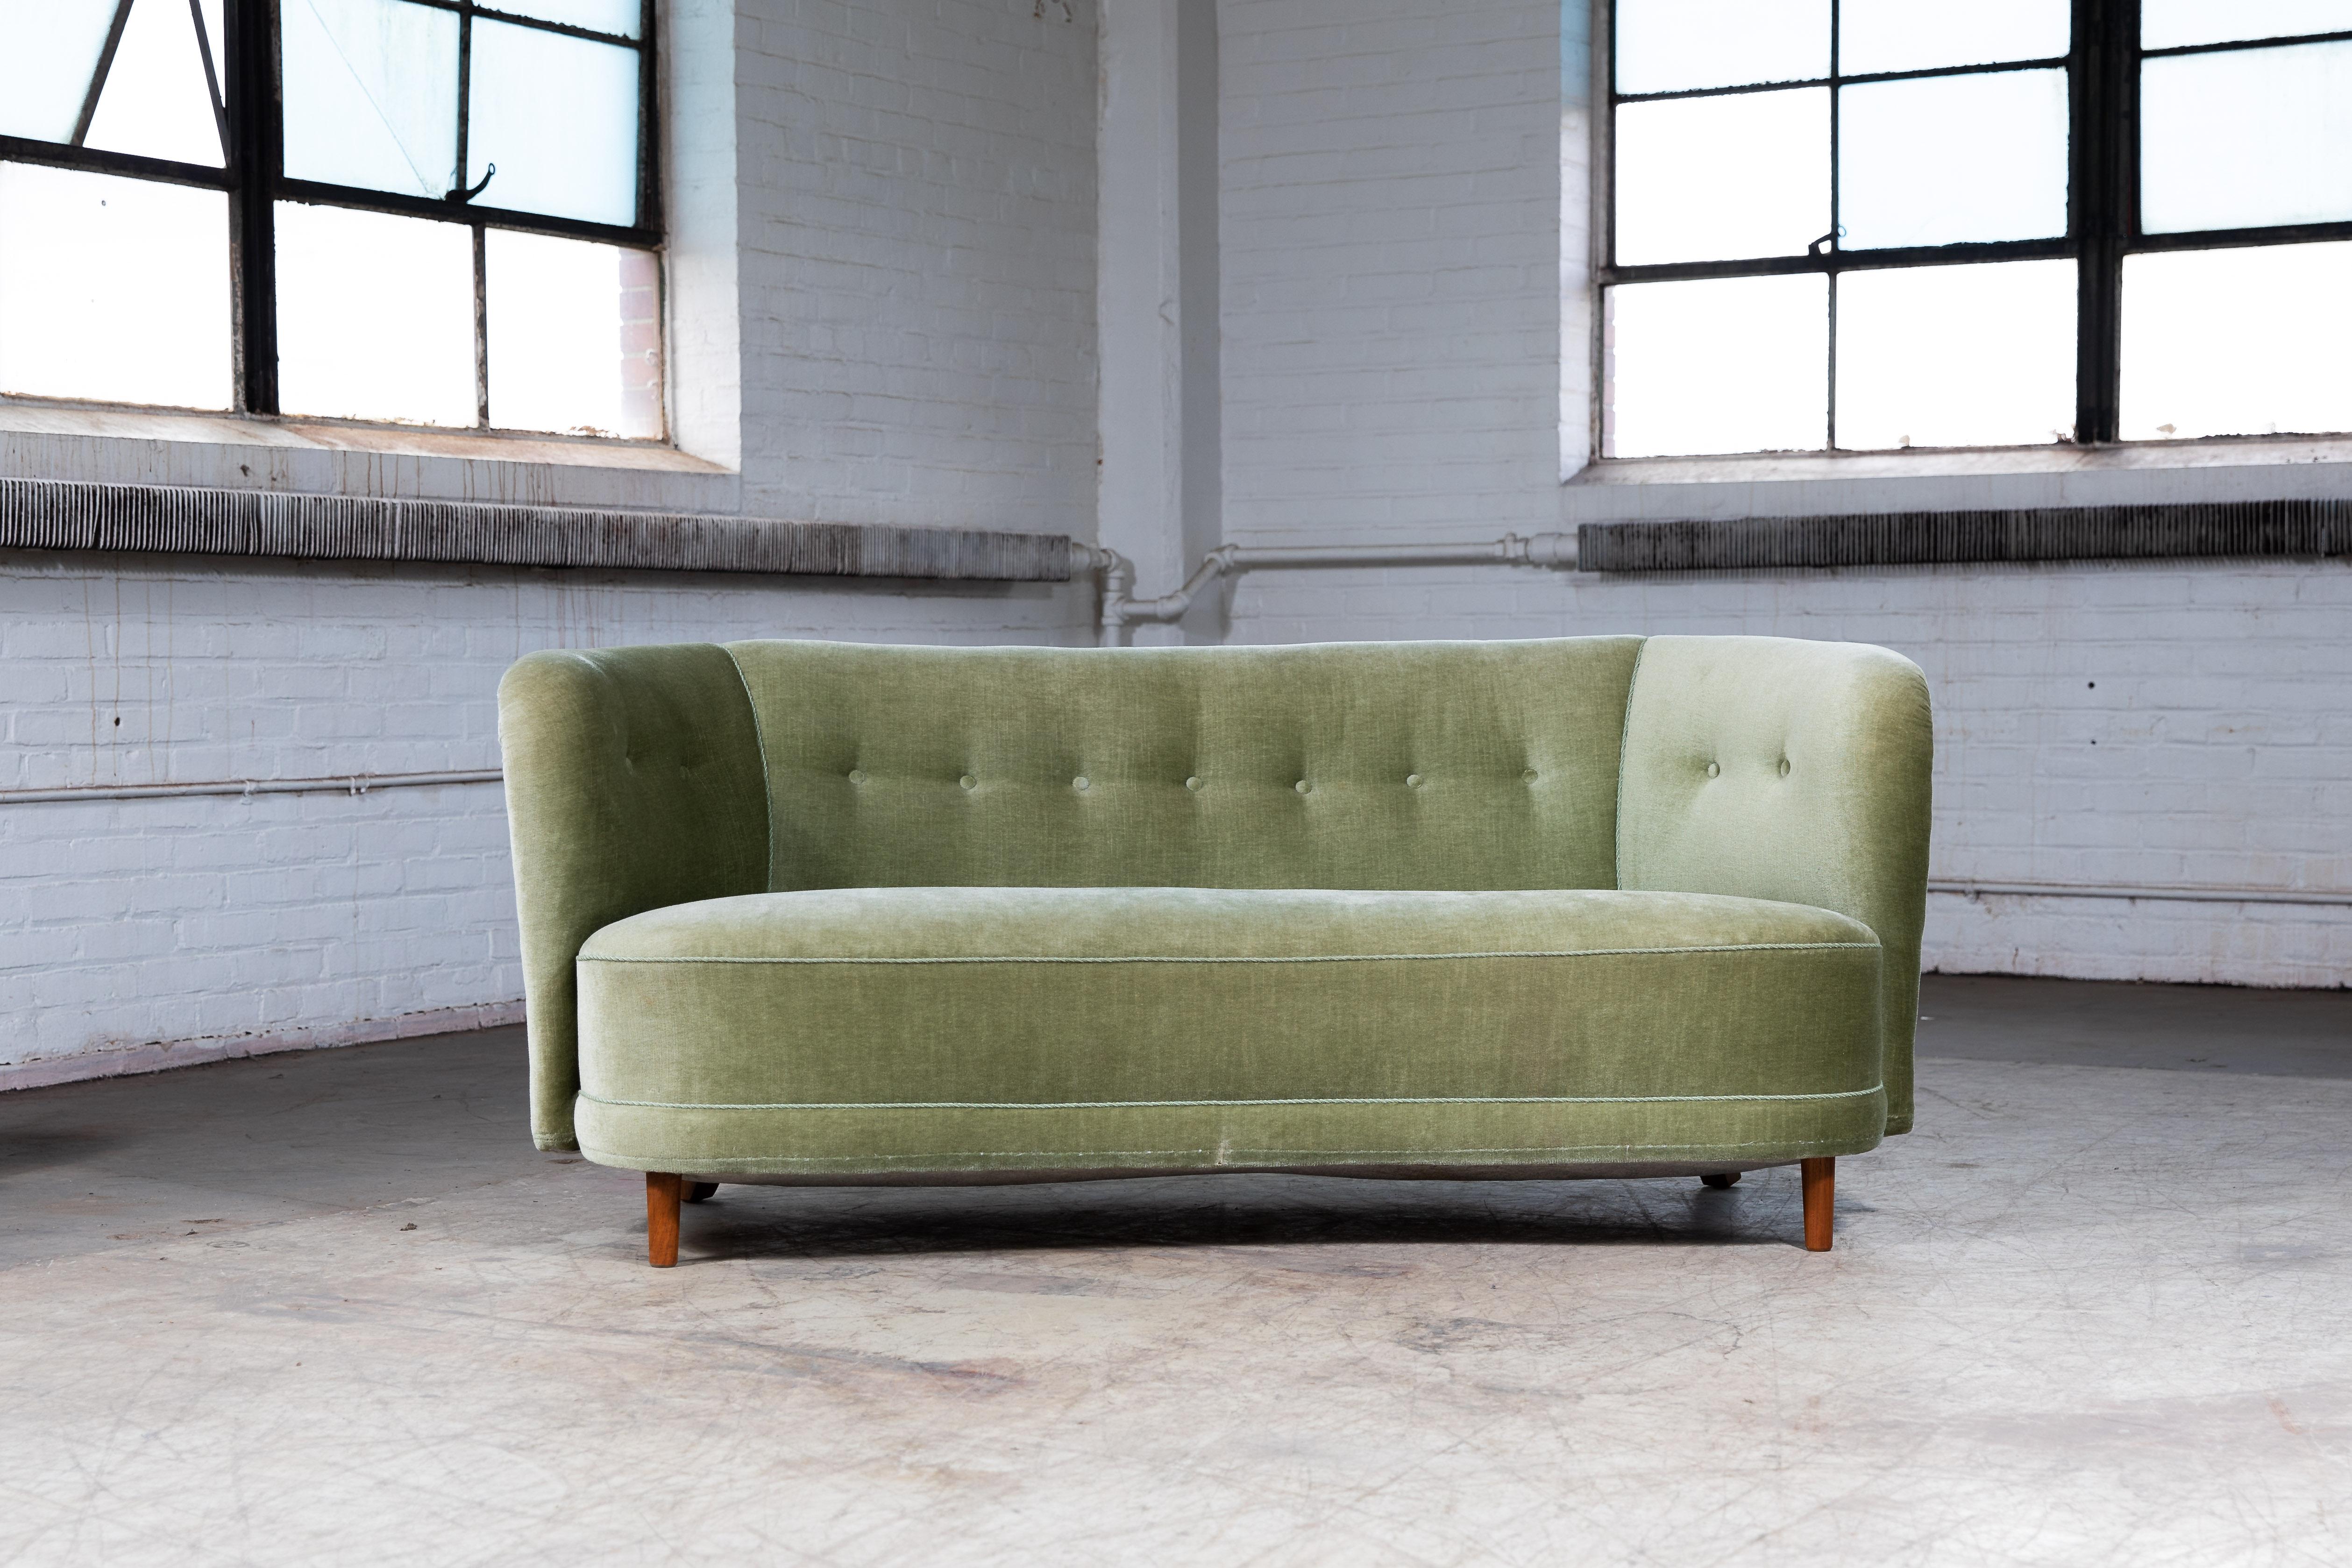 Beautiful and very elegant 1940s curved settee or sofa in green mohair fabric. The sofa has springs in the seat and the backrest and cushions are nice and firm and the sofa solid and sturdy. The mohair wool fabric is in good clean condition showing